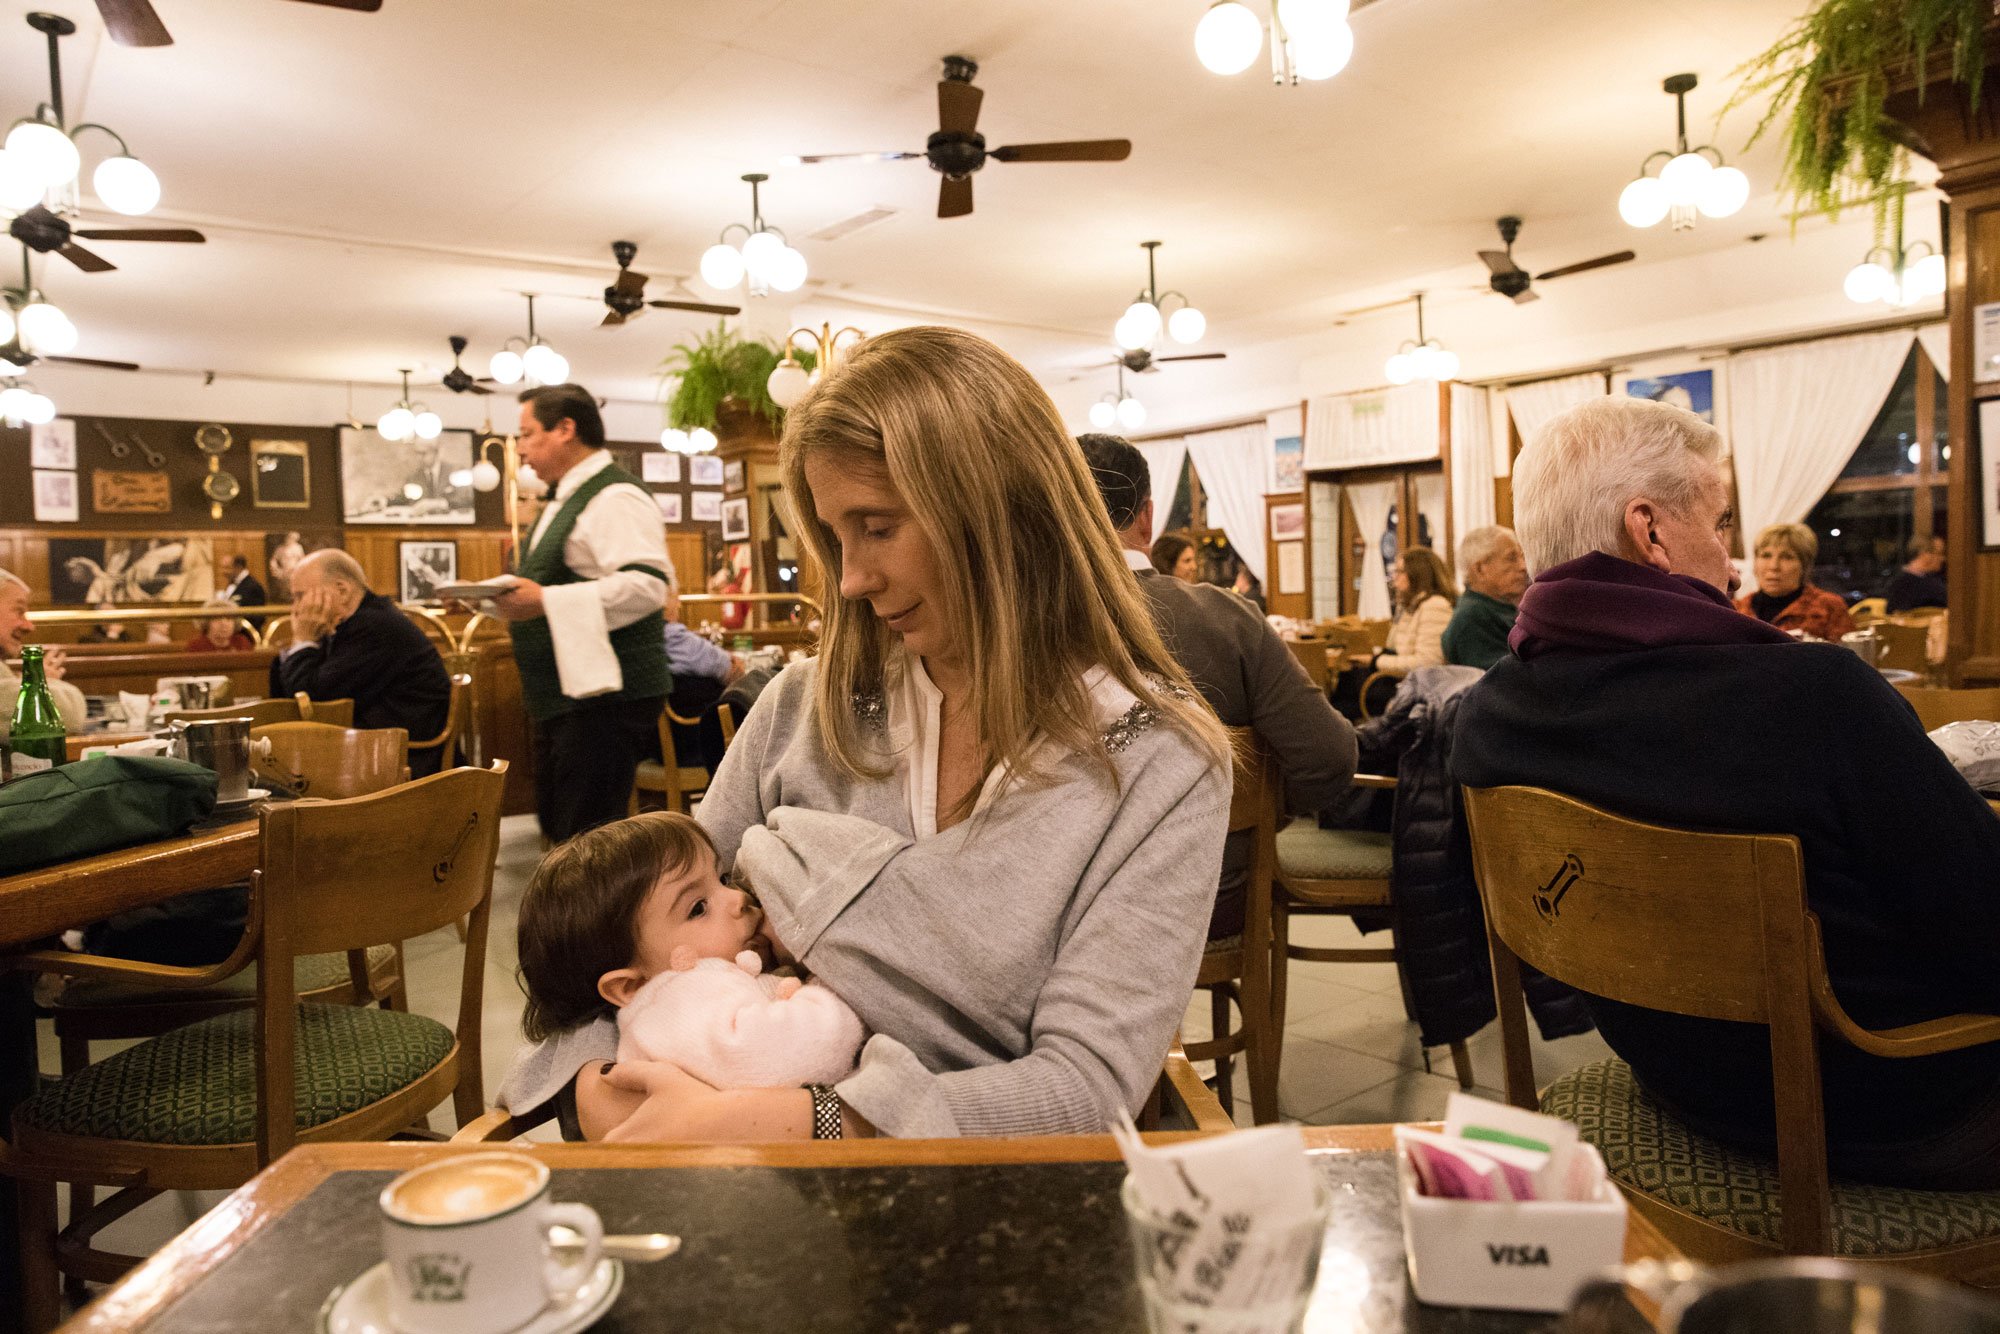 Tina Boyadjieva photographs Silvia in Argentina as she breastfeeds in a crowded cafe for Lansinoh USA